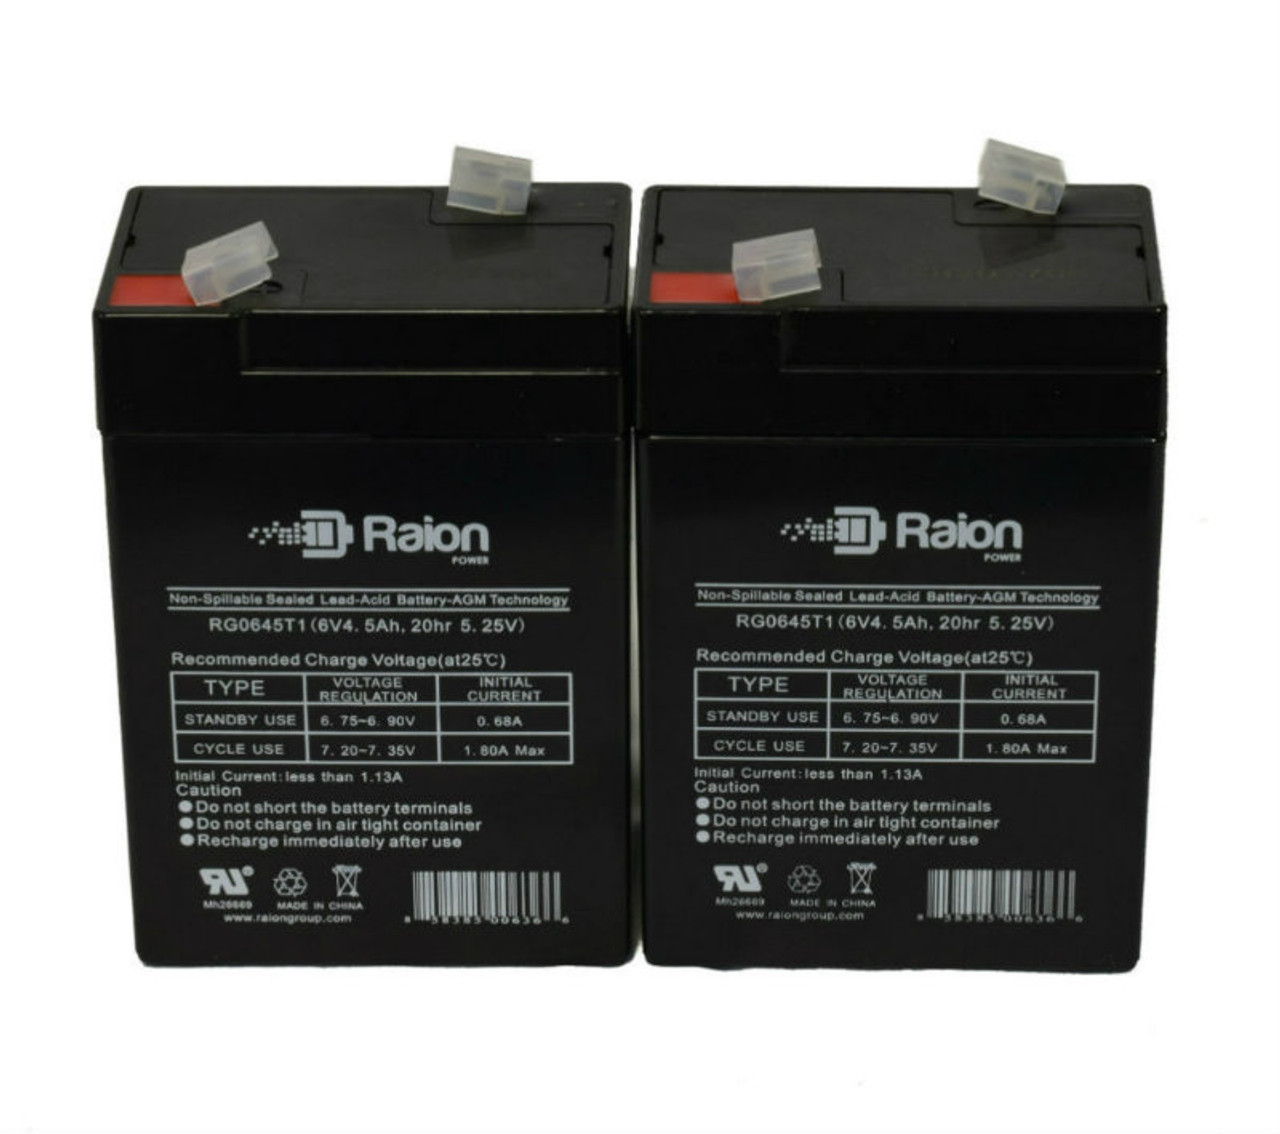 Raion Power RG0645T1 6V 4.5Ah Replacement Medical Equipment Battery for Ladd Steritak J3000 Inter Cranial Pressure Monitor - 2 Pack